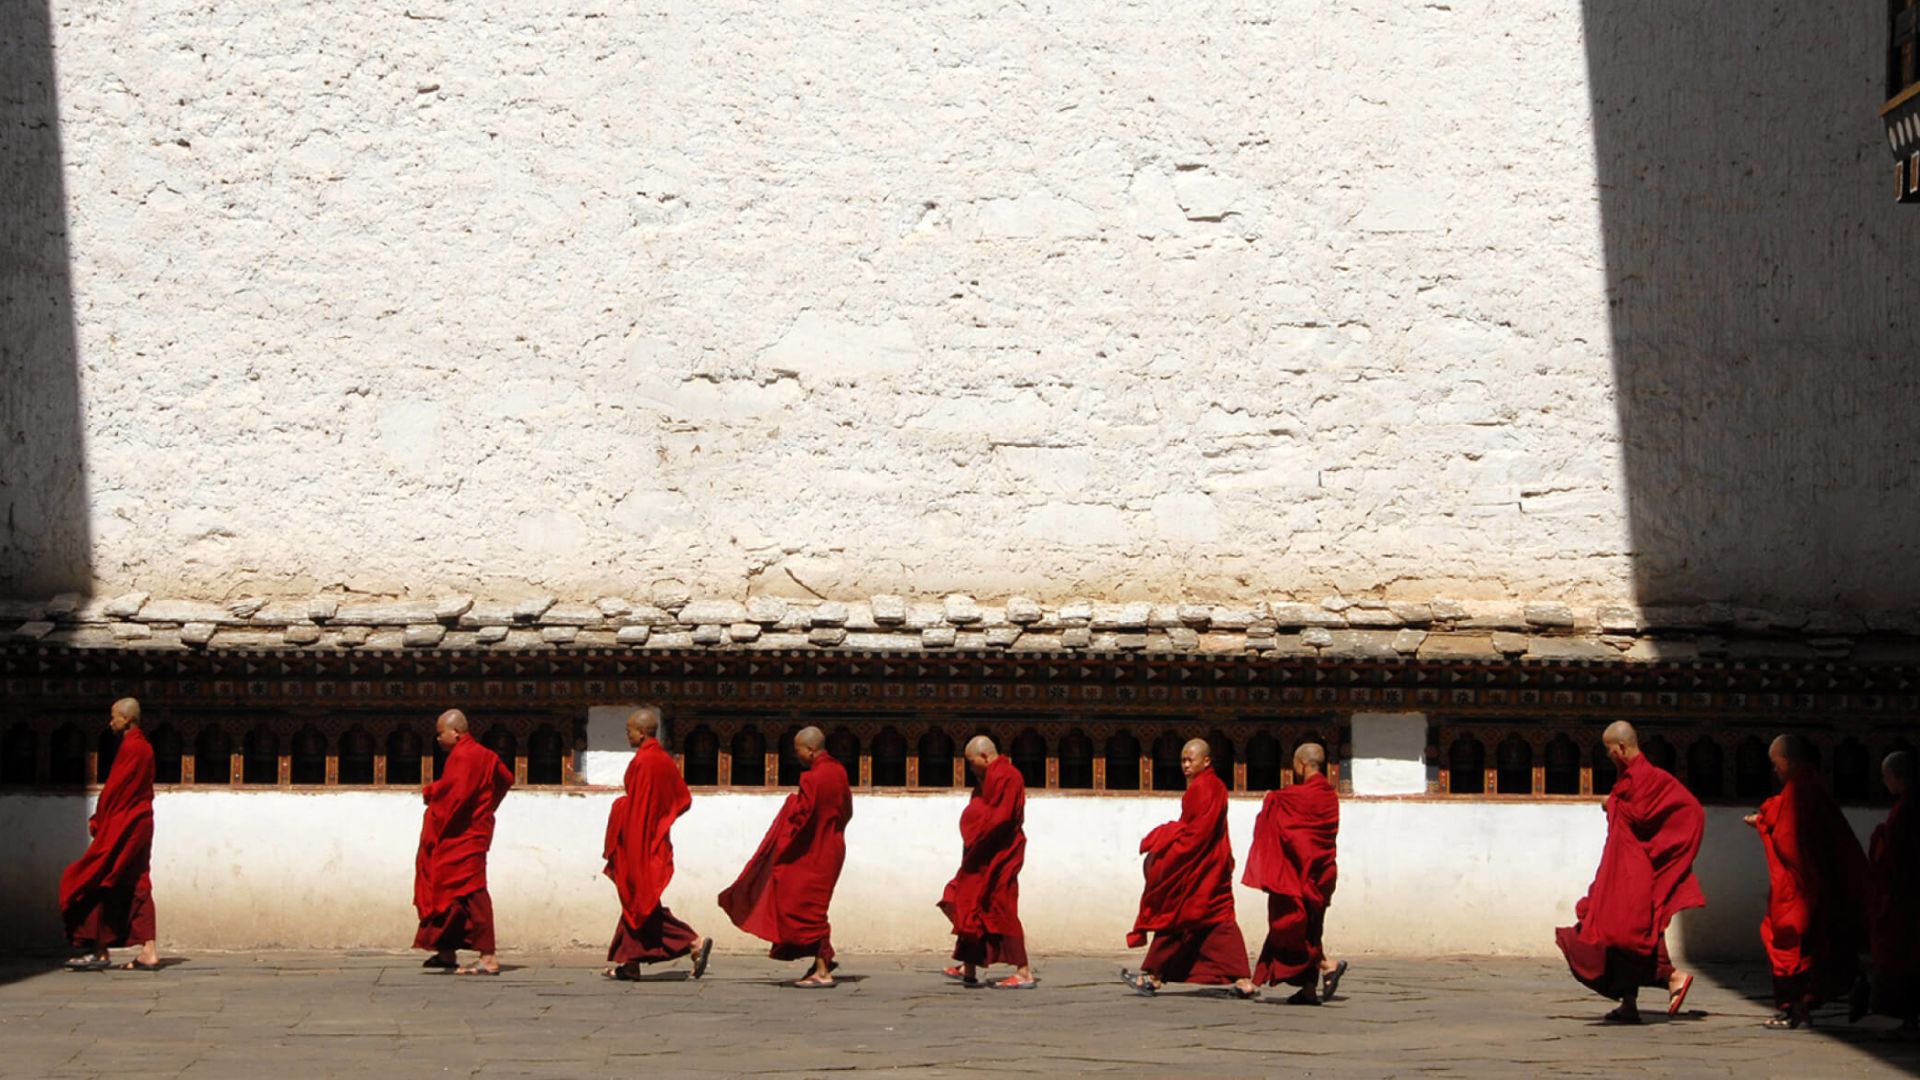 A Group Of People In Red Robes